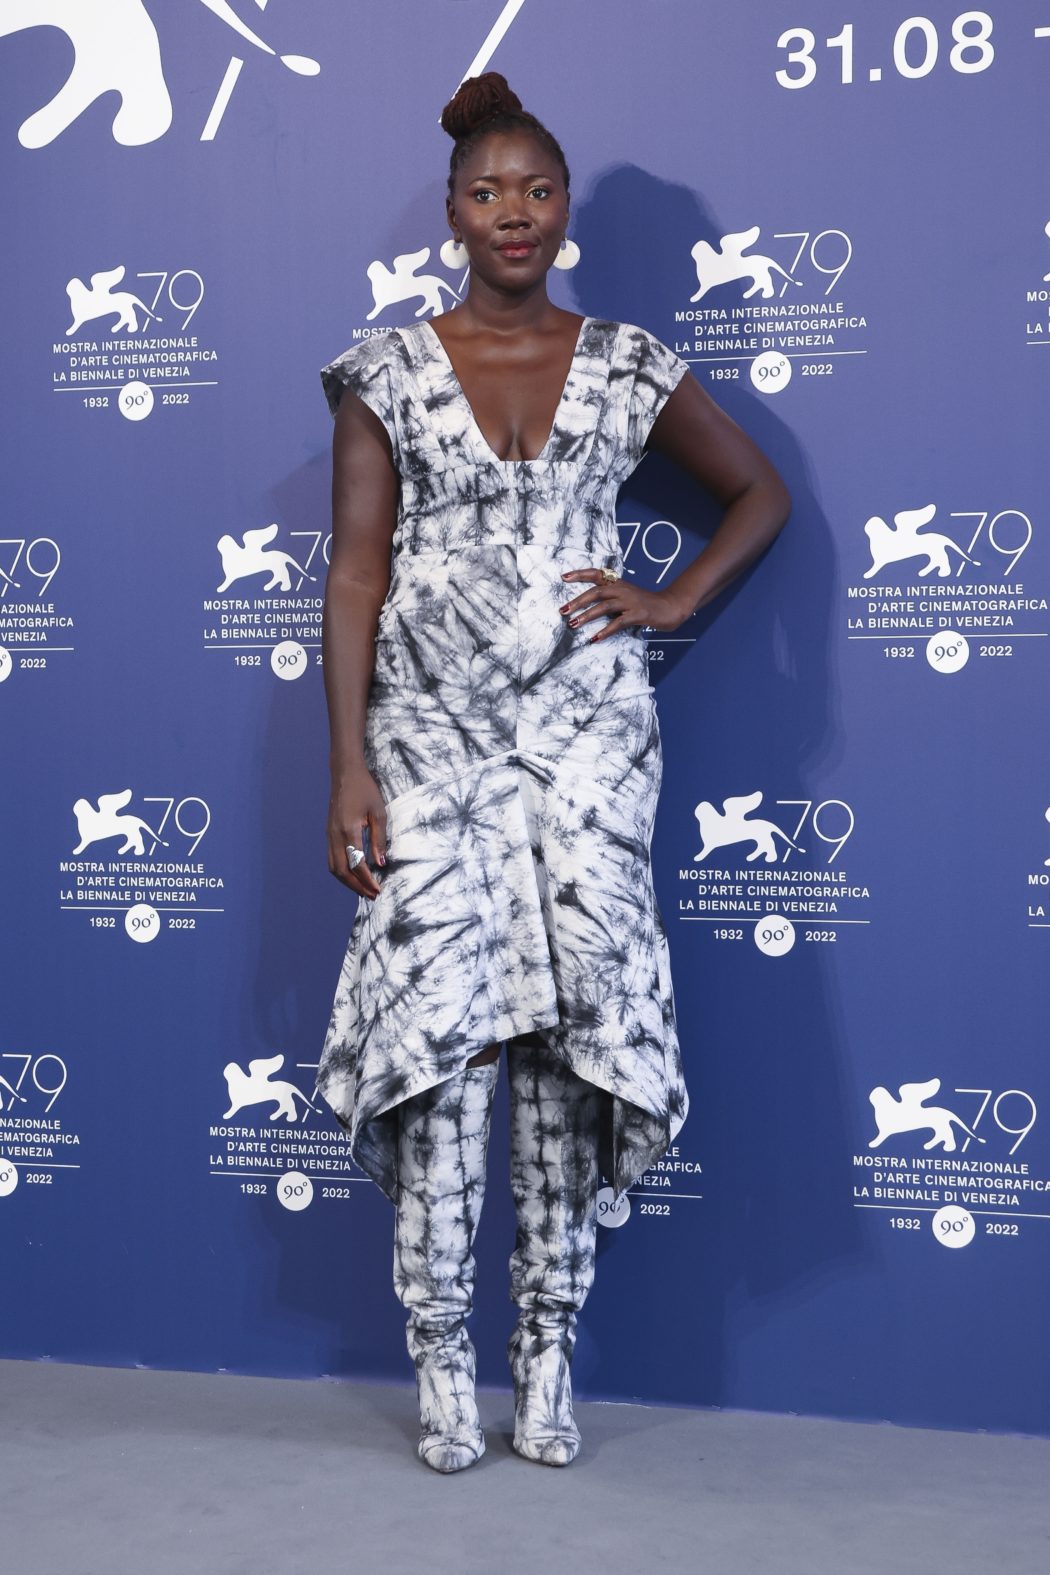 Alice Diop poses for photographers upon arrival at the premiere of the film ‘Saint Omer’ during the 79th edition of the Venice Film Festival in Venice, Italy, Wednesday, Sept. 7, 2022. (Photo by Joel C Ryan/Invision/AP)